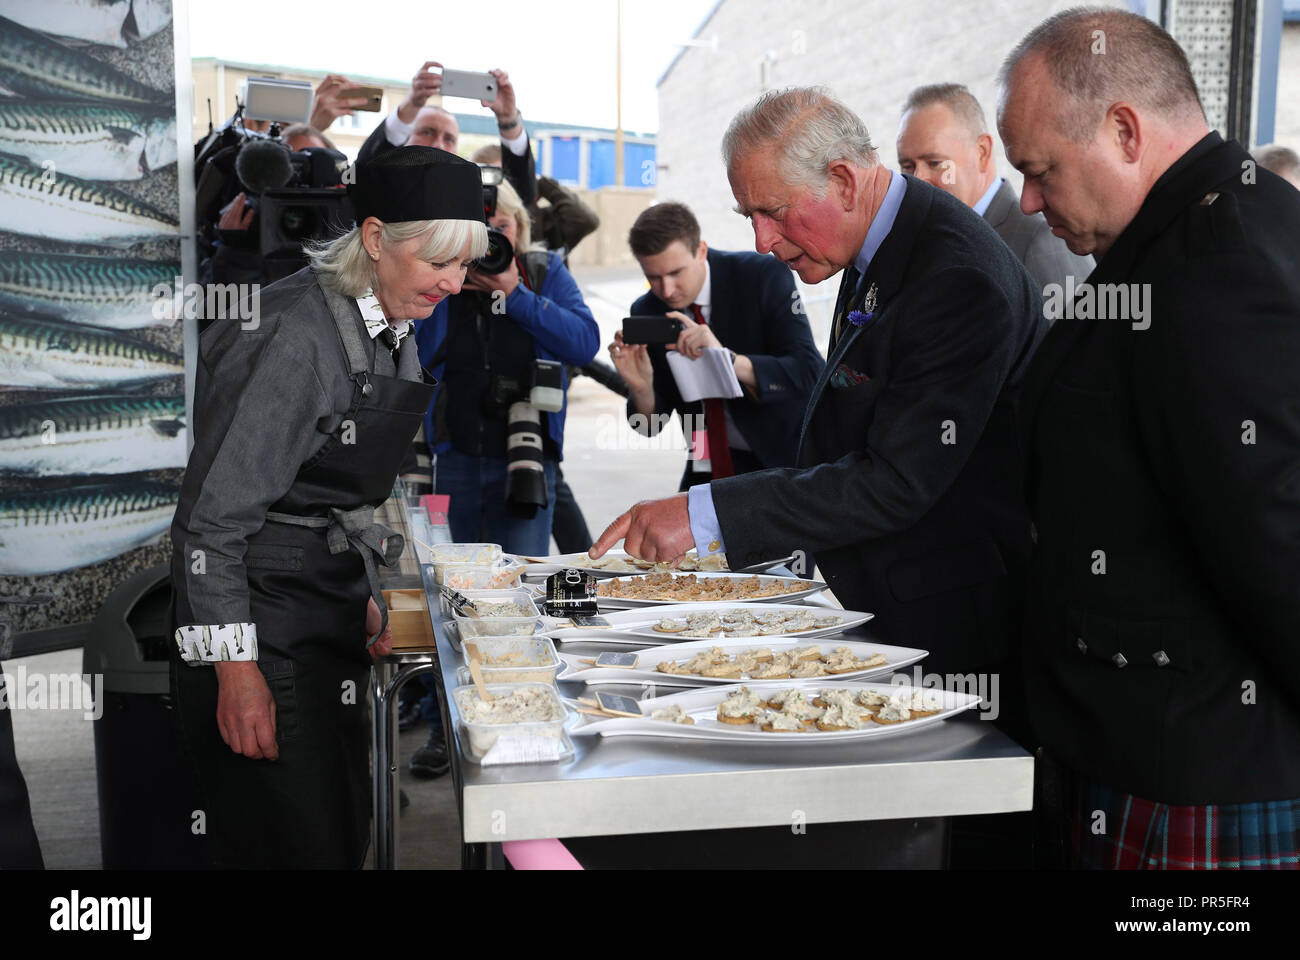 The Prince of Wales known as the Duke of Rothesay whilst in Scotland, views a seafood stall during a visit to Peterhead fish market for the opening of the new North Bay market building. Stock Photo